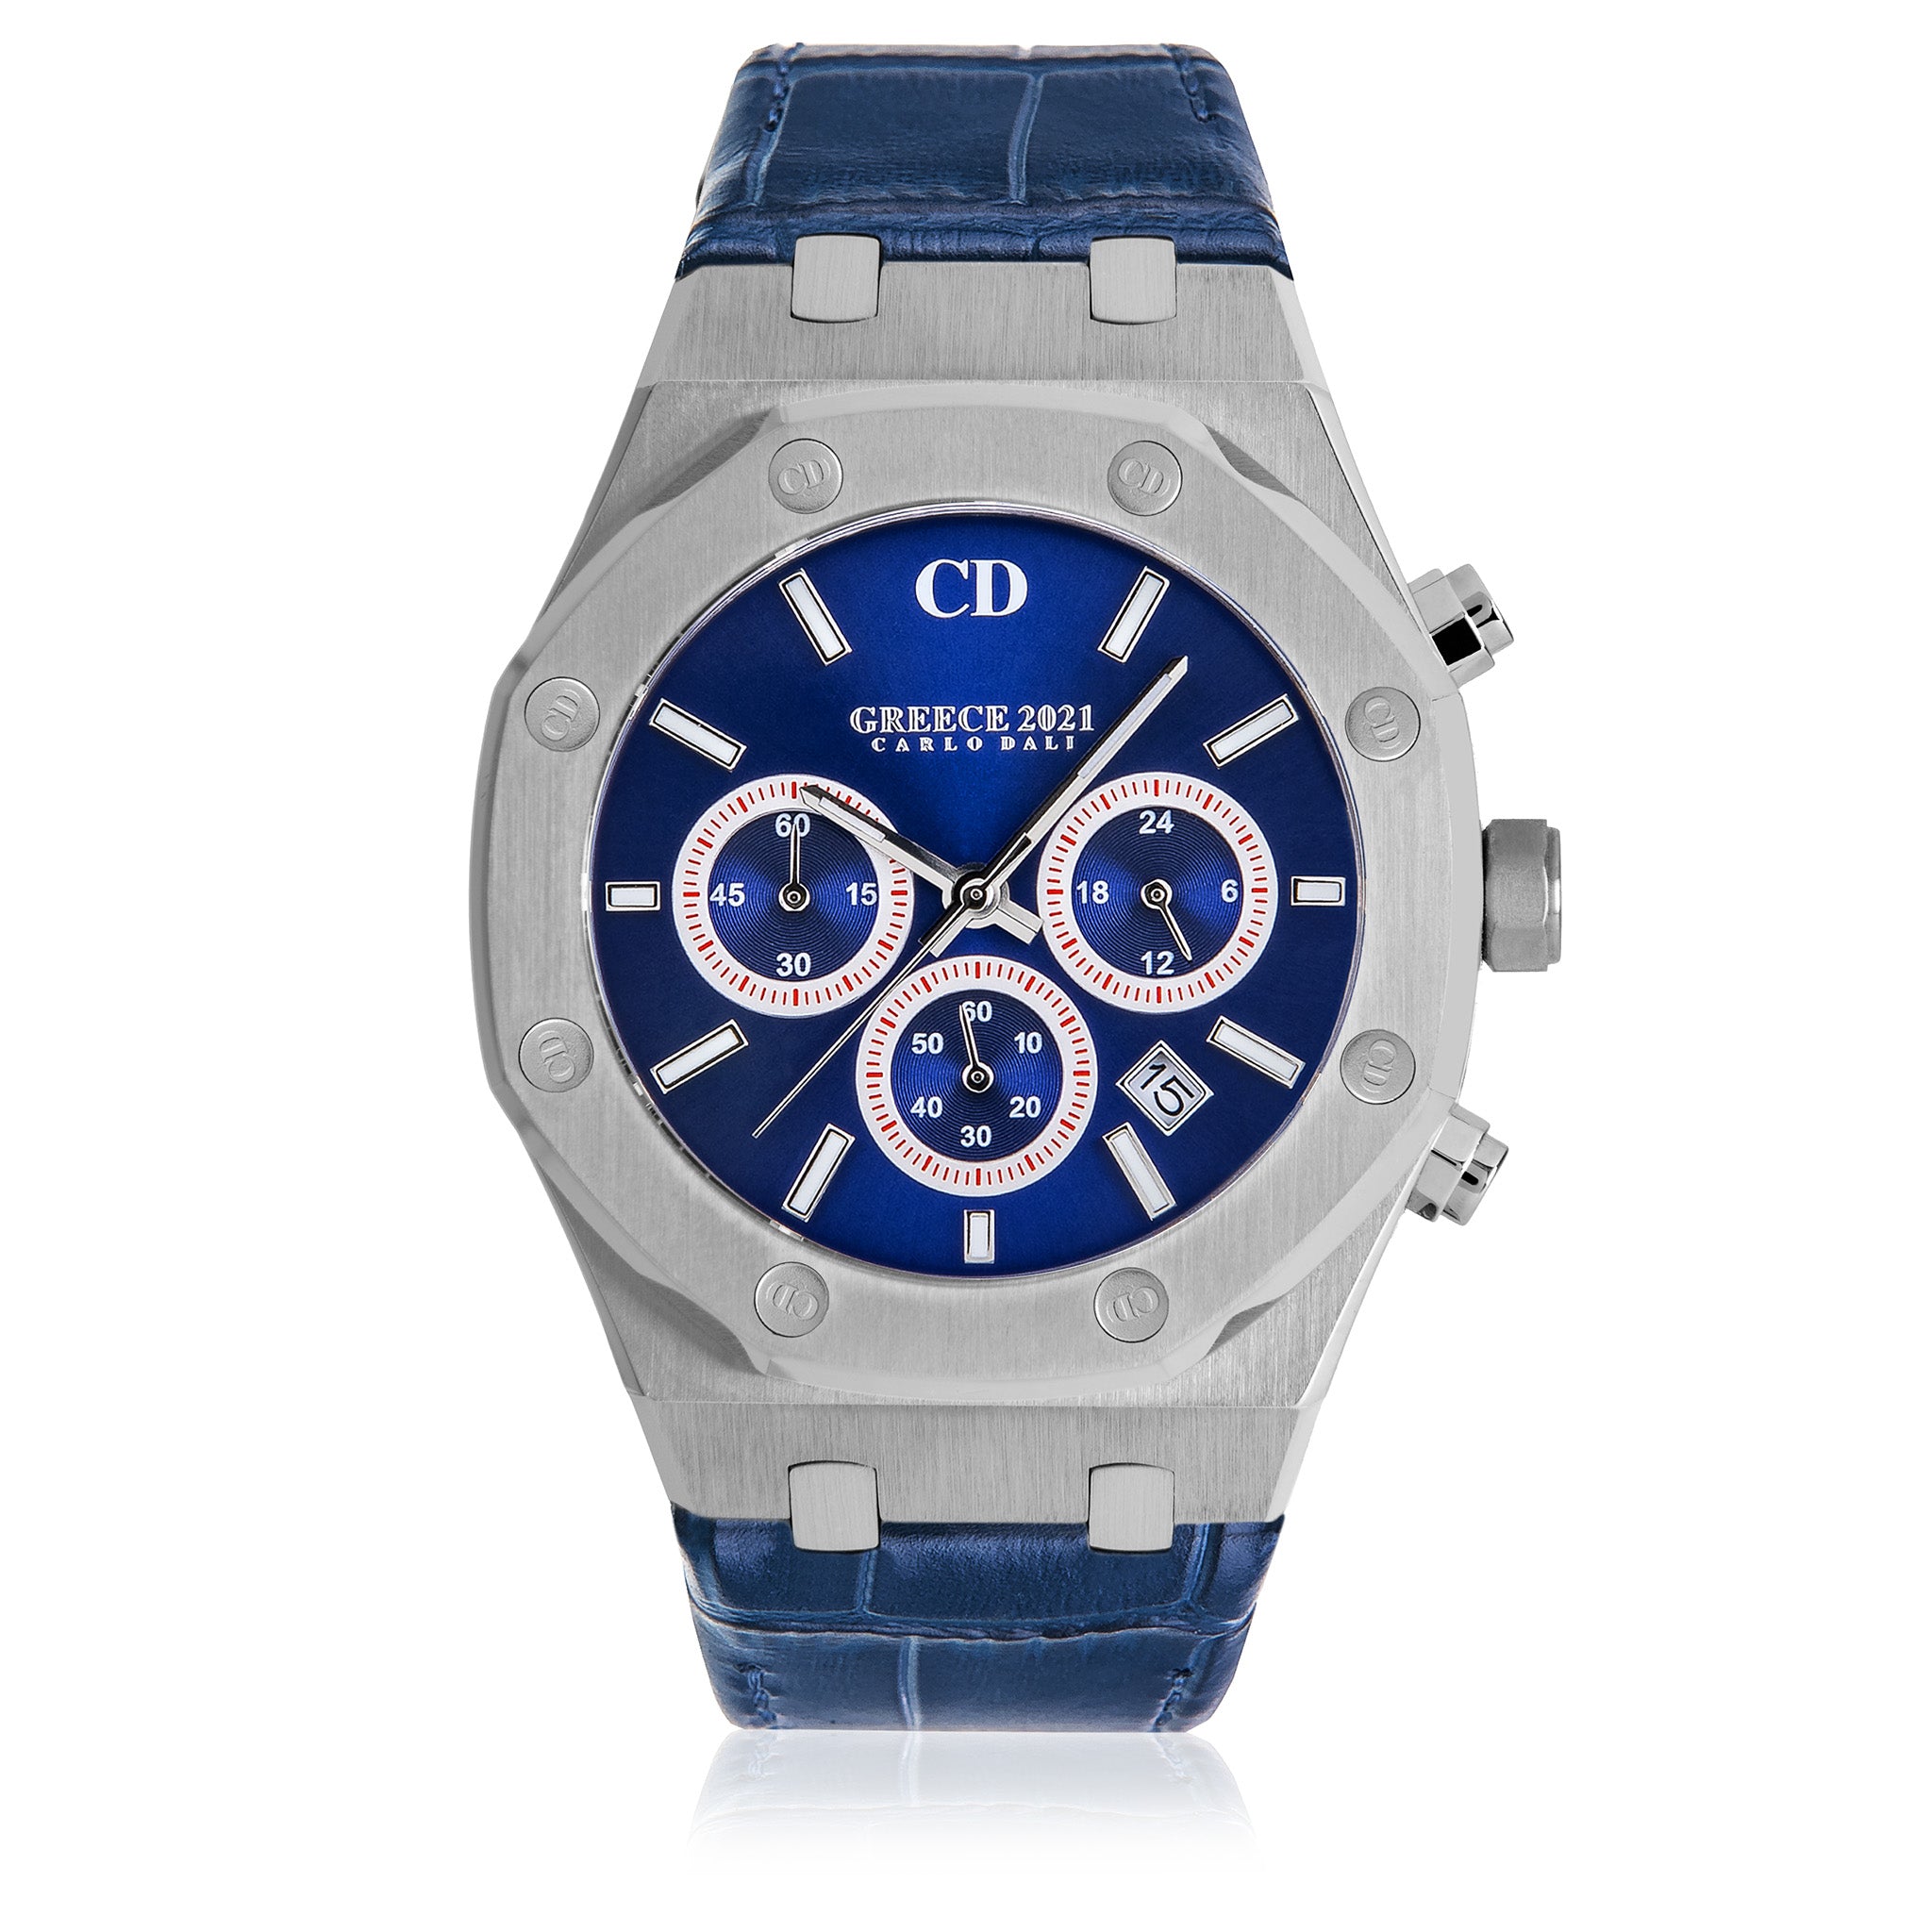 GREECE 2021 Chronograph leather BLUE LIMITED